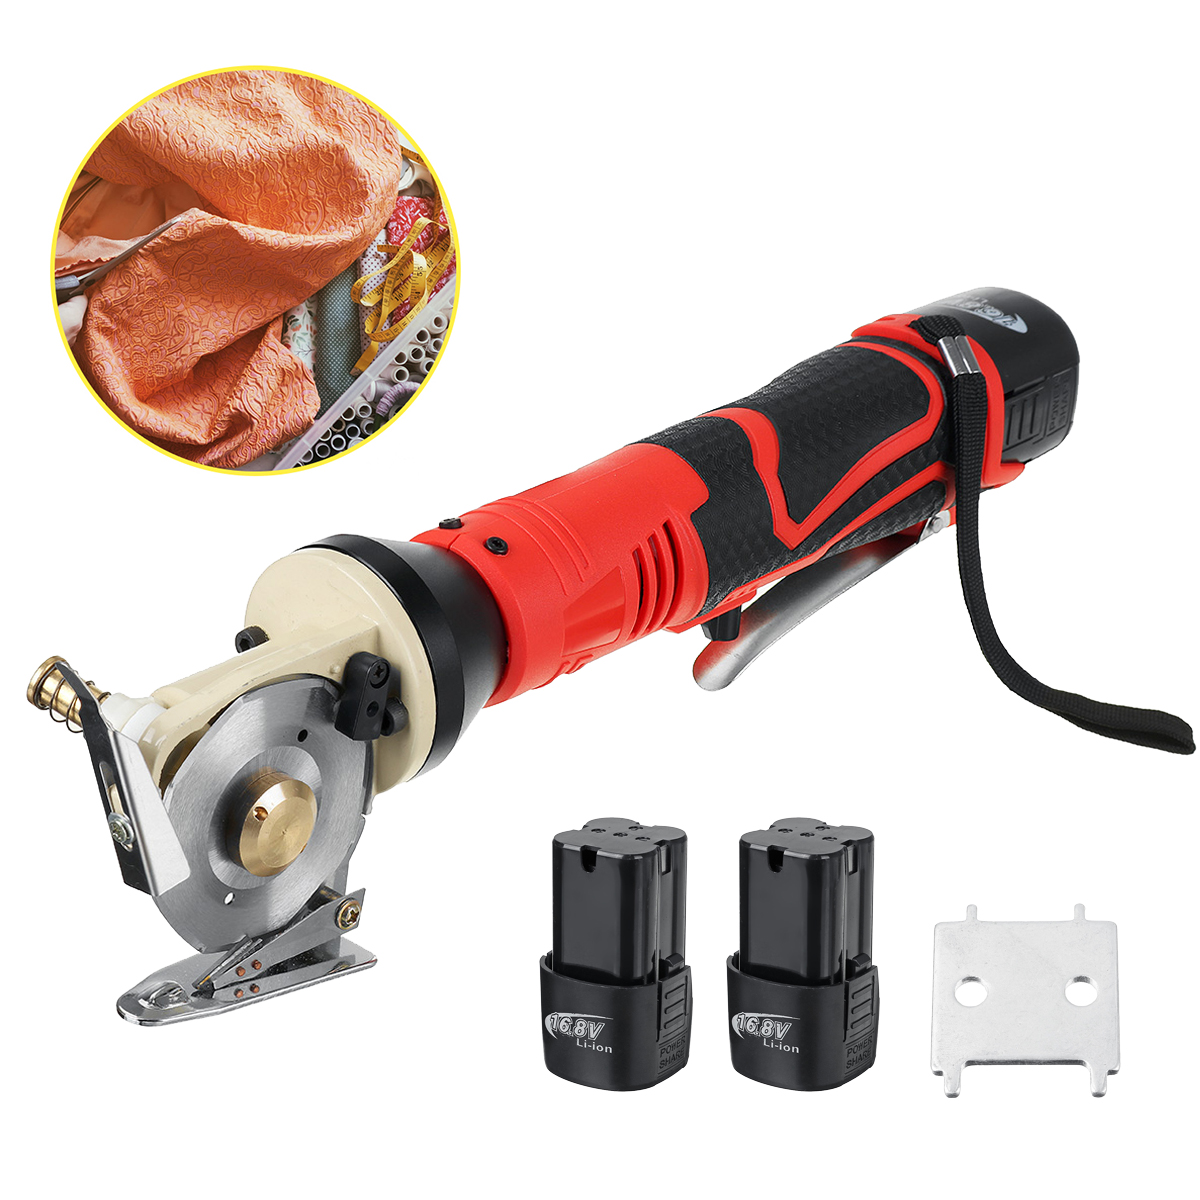 Cordless-Rechargeable-Electric-Cloth-Fabric-Cutting-Tools-Leather-Blanket-Electric-Cutter-Saws-Machi-1868912-3